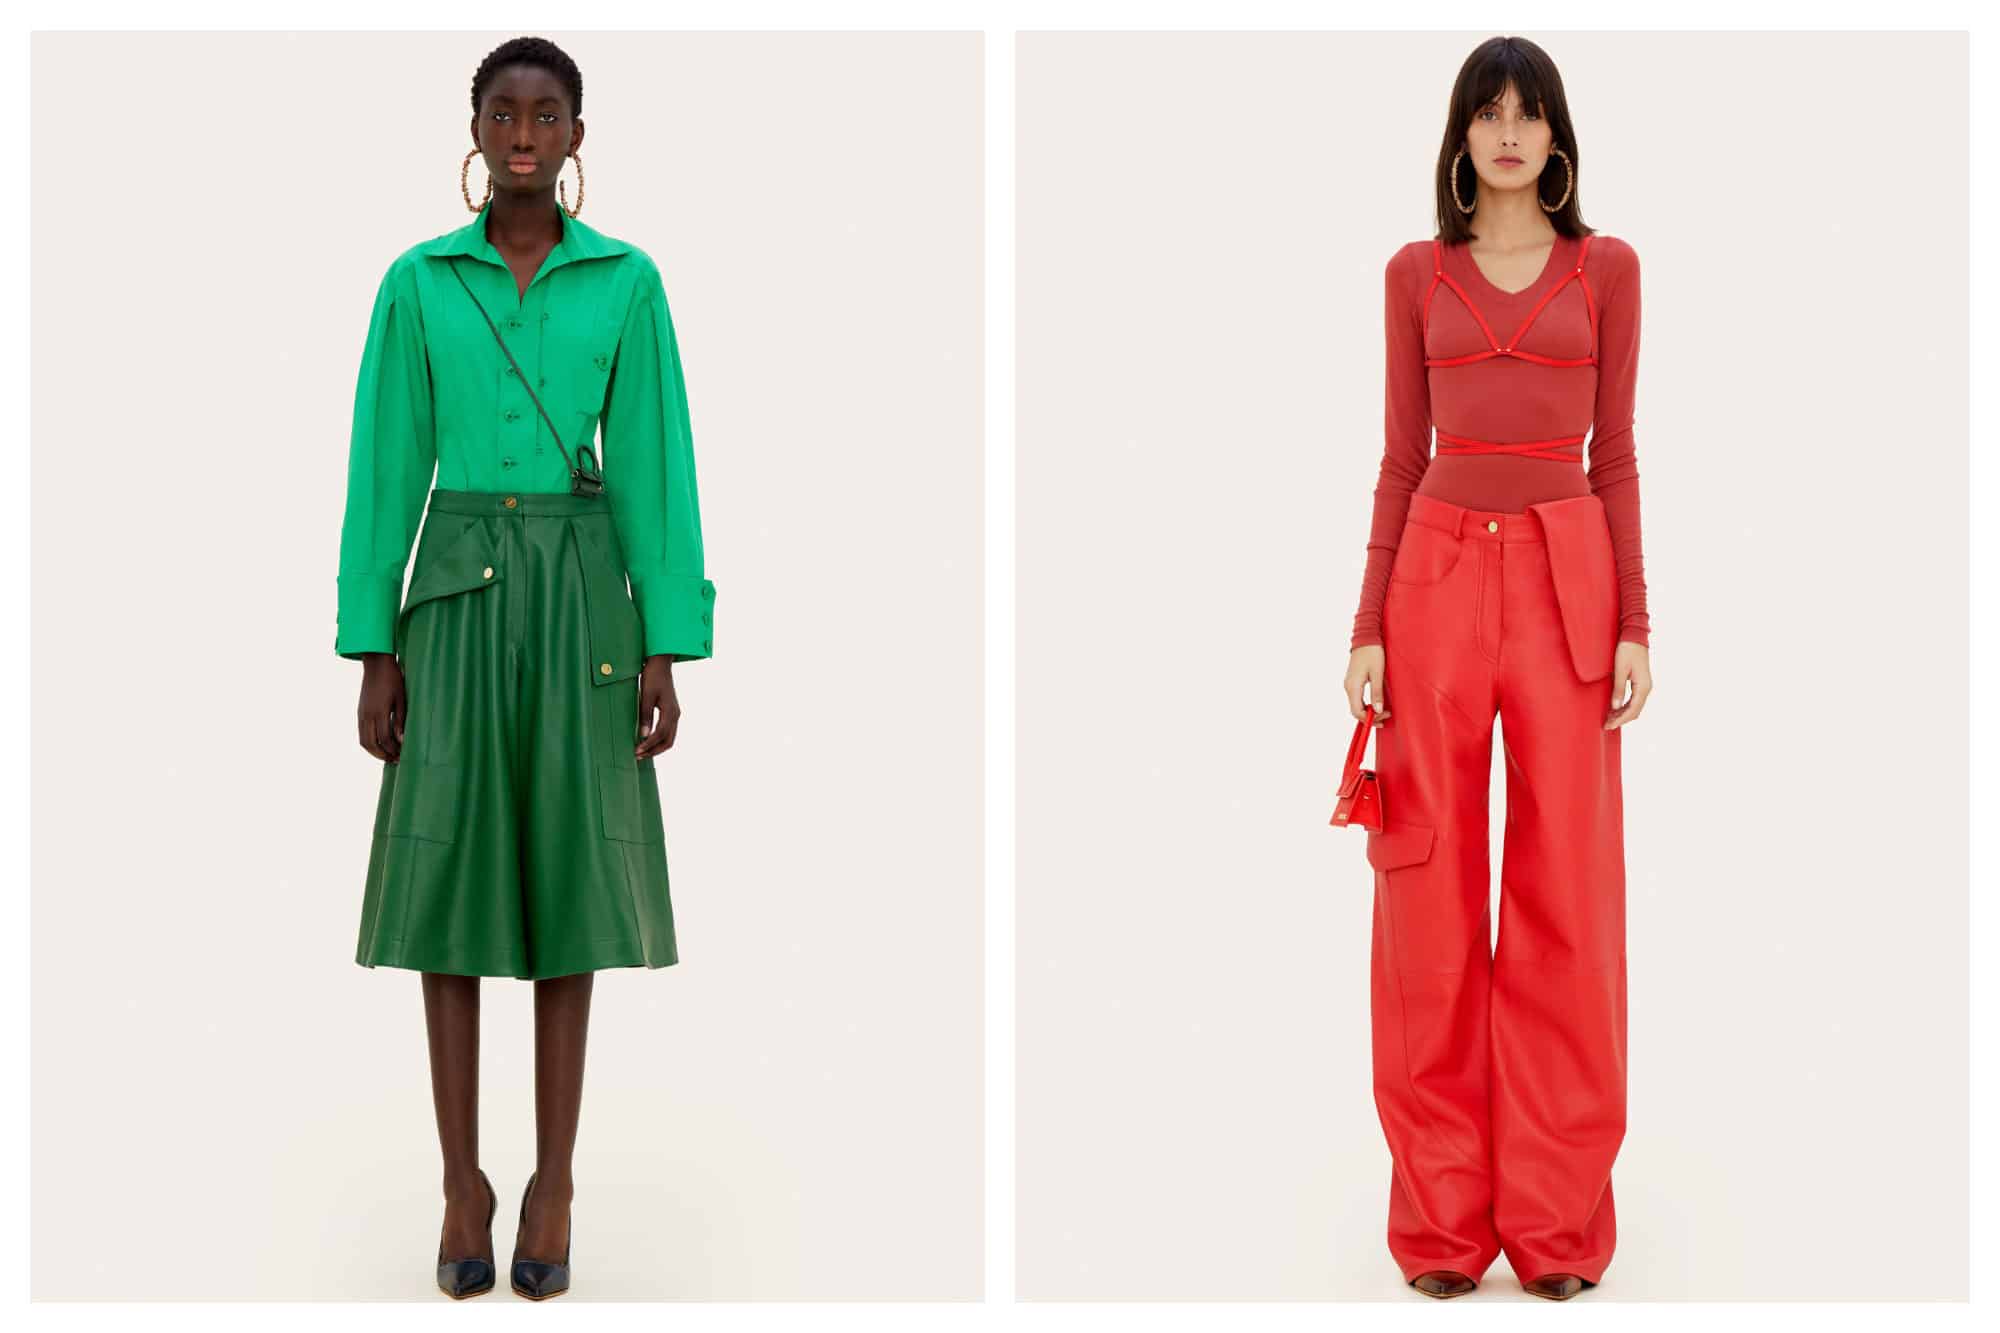 A black woman wearing a bright green blouse and skirt (left). A white woman wearing a bright red top and trousers (right), both by Jacquemus.